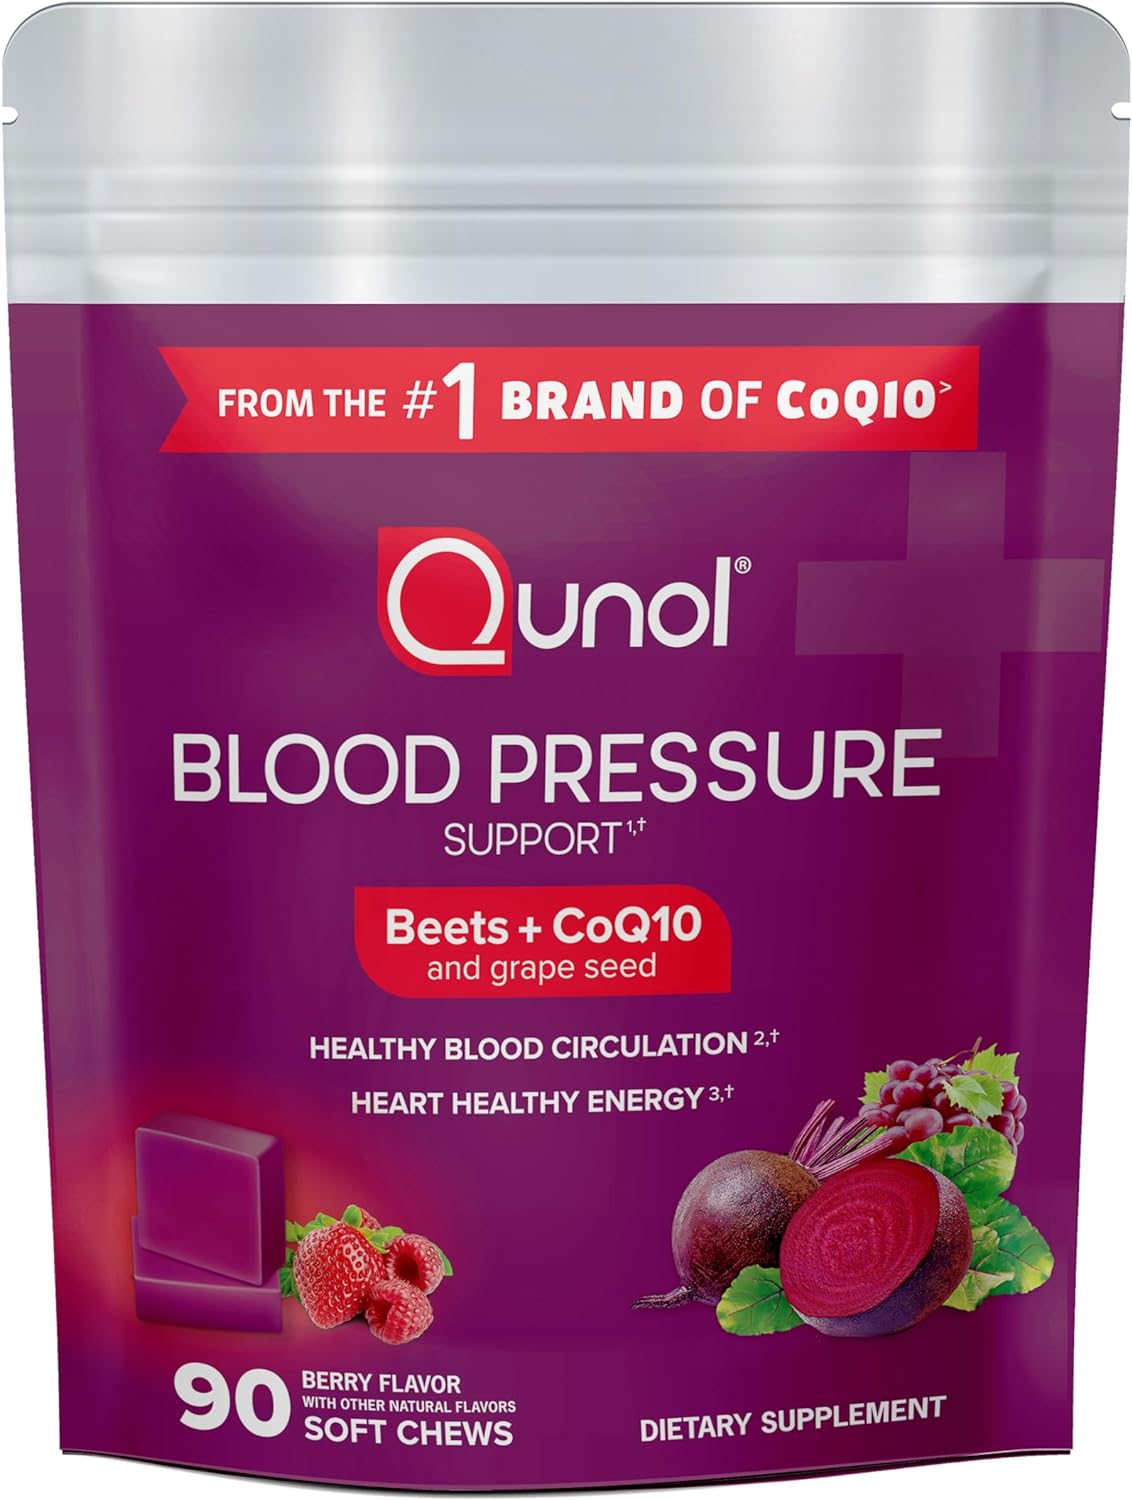 Qunol Beets Chews for Blood Pressure Support, 3 in 1 Beets + CoQ10 + Grape Seed Extract, Supports Healthy Blood Circulation & Heart Healthy Energy, 90 Chews